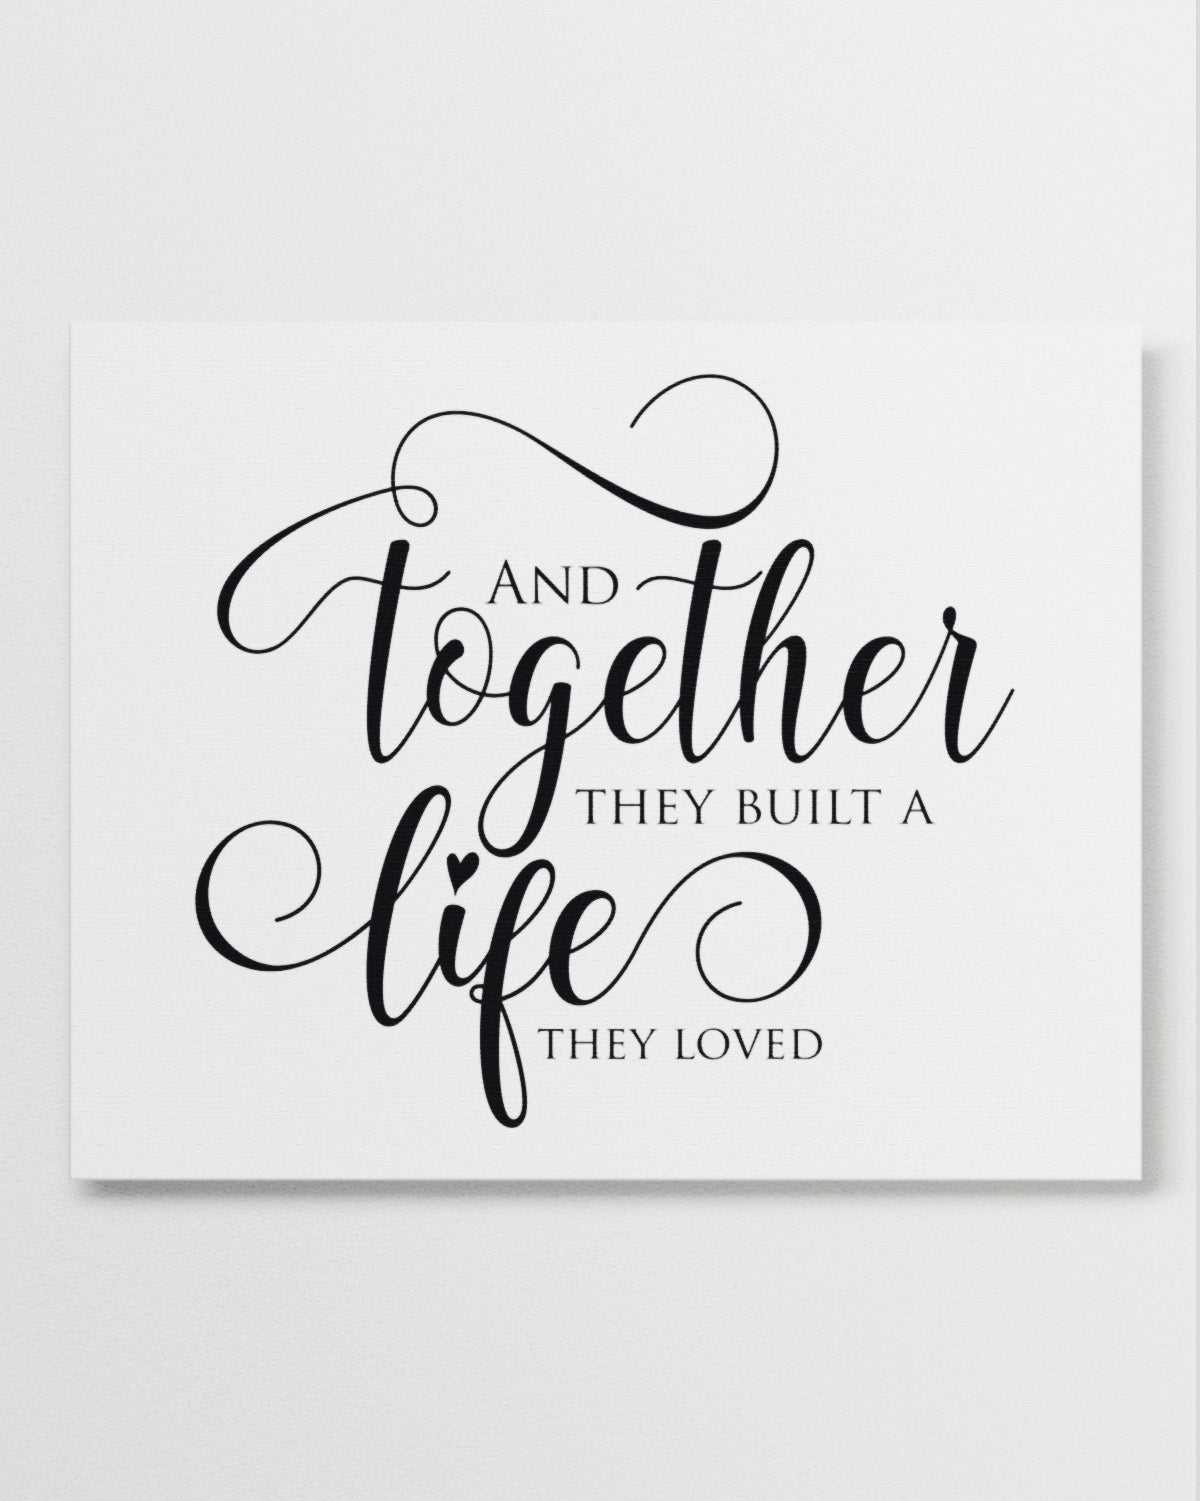 And Together They Built A Life They Loved - Master Bedroom Decor - Minimalist wall art - Romantic Bedroom Wall Decor for Couples - Anniversary and Wedding Gifts